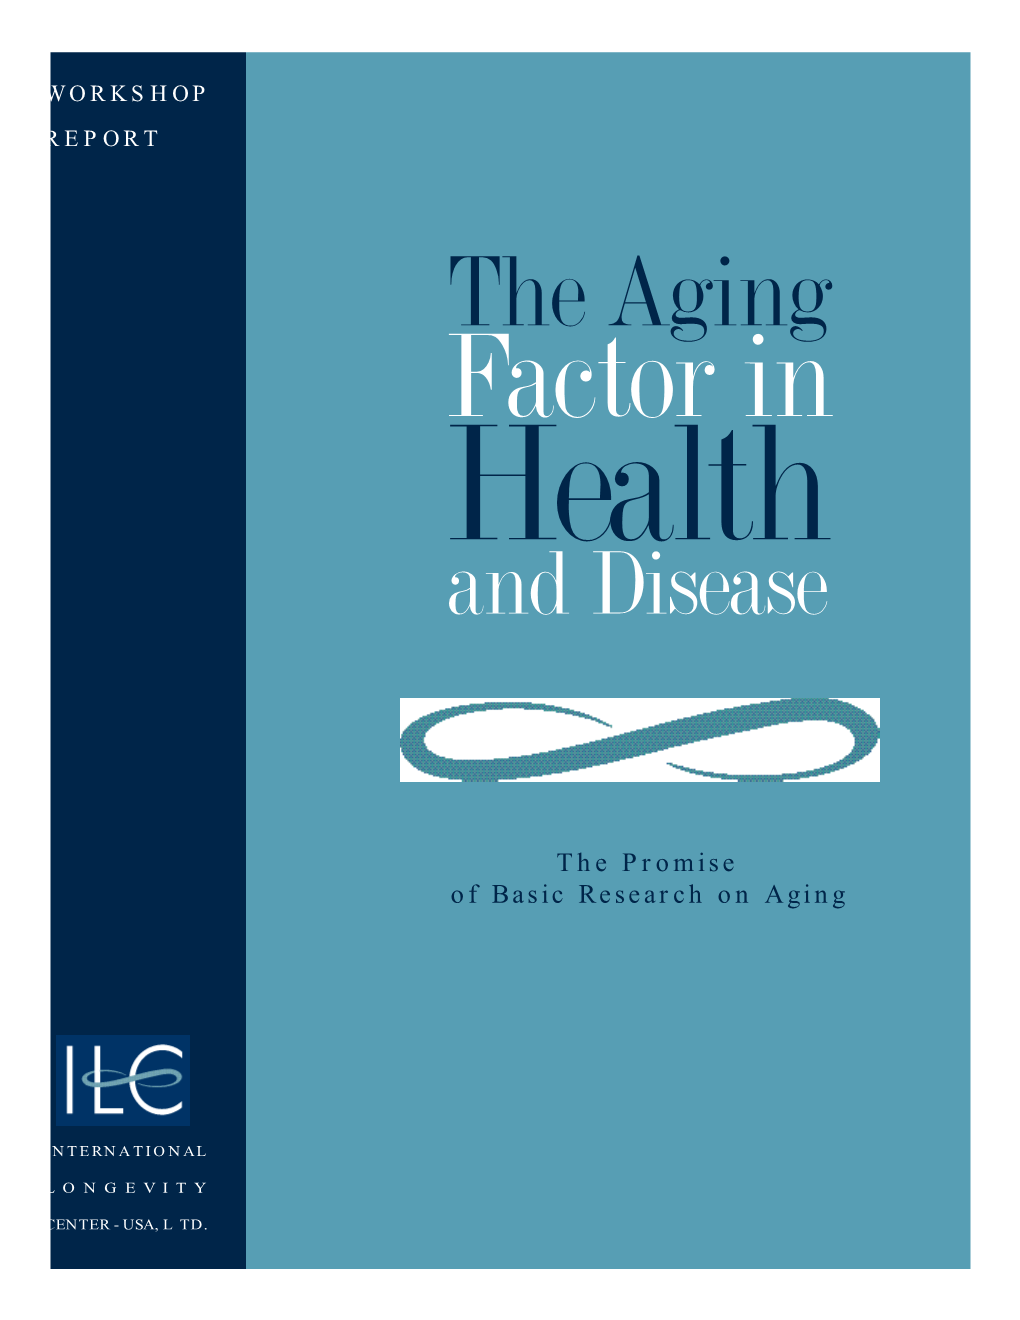 The Aging Factor in Health and Disease